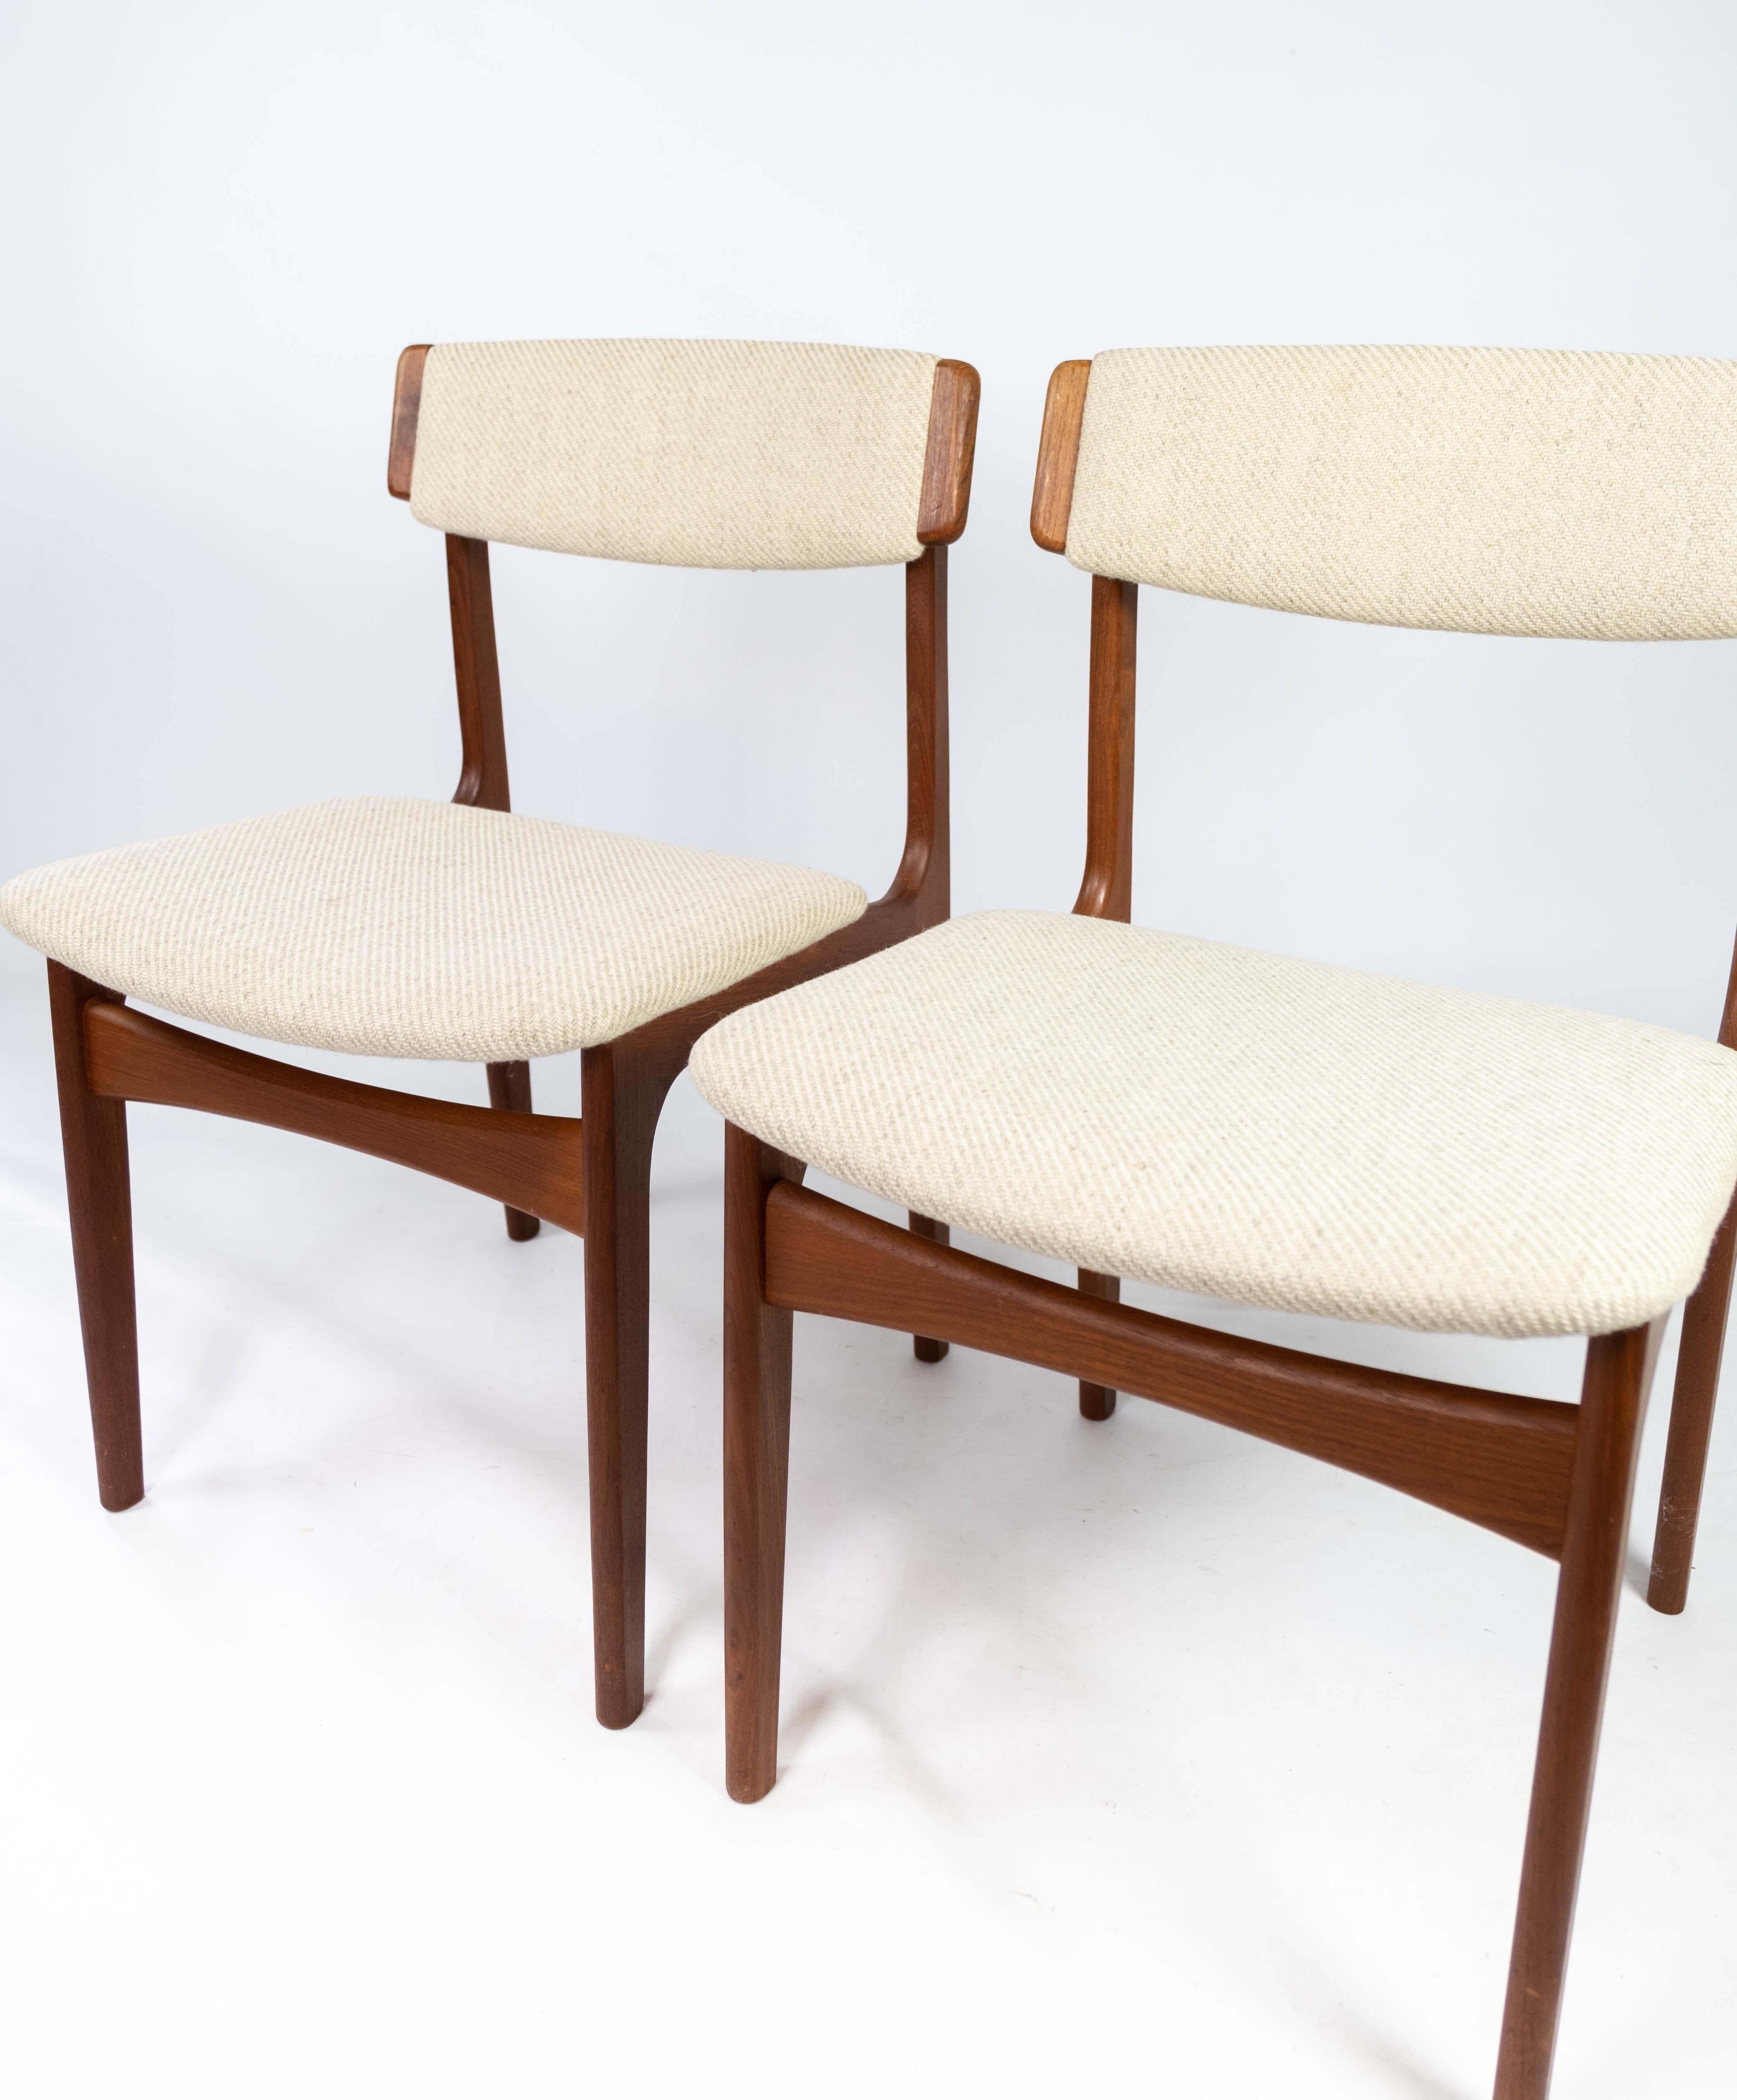 Set of dining room chairs in teak and upholstered with light fabric, designed by Erik Buch from the 1960s. The chairs are in great vintage condition.
 